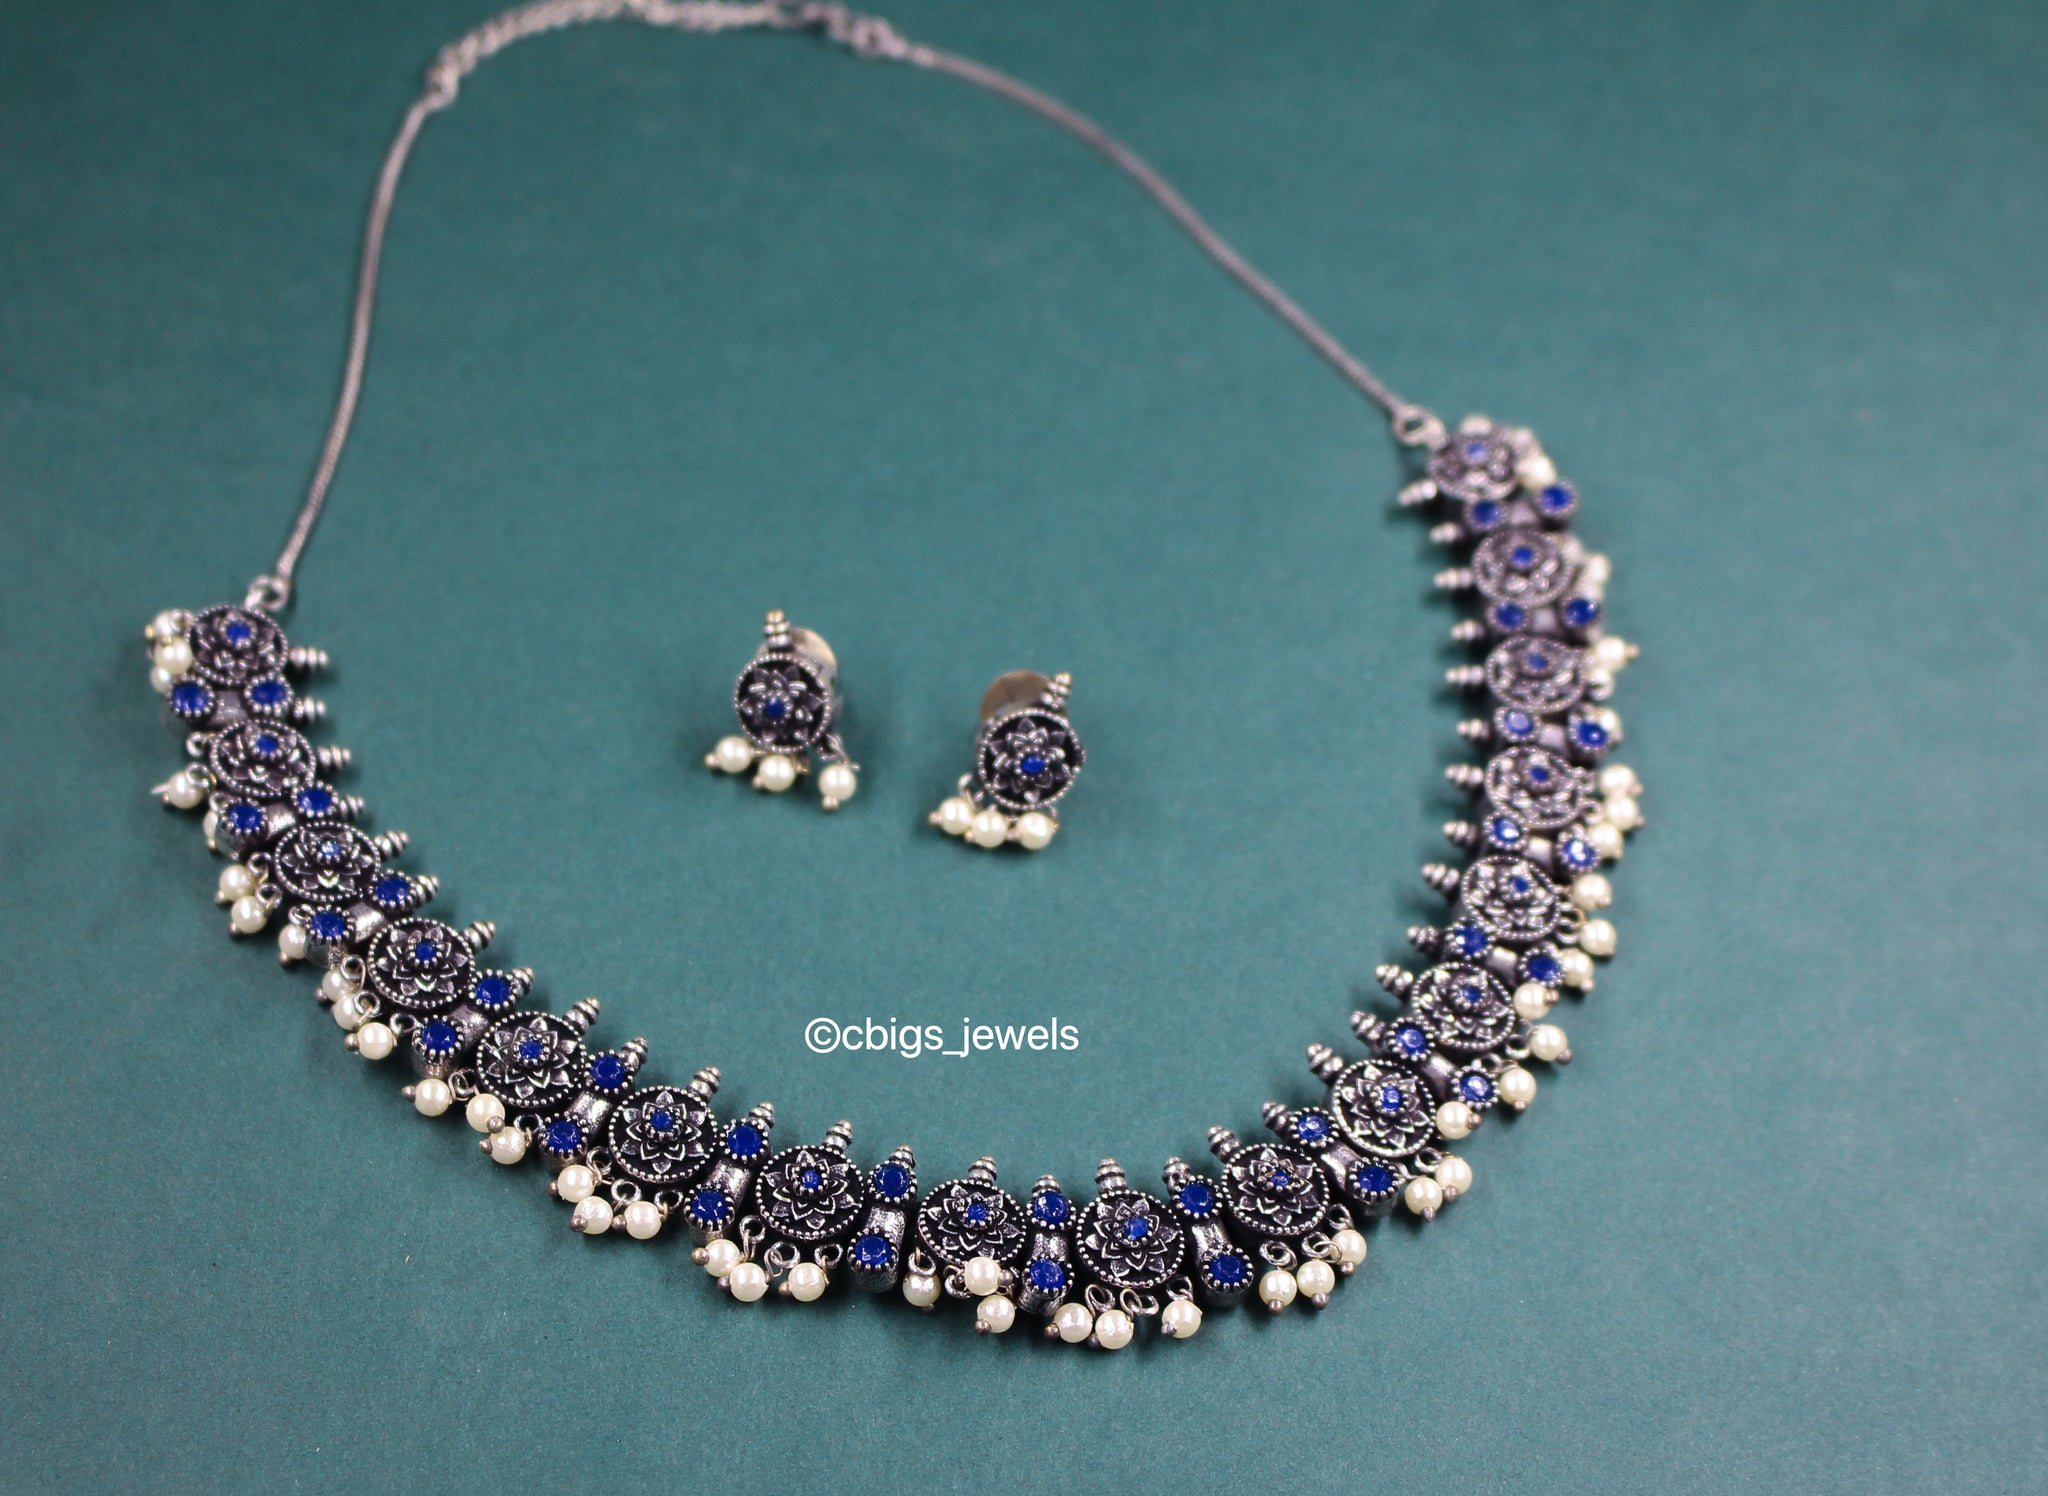 Silver Oxidized Necklace with Blue stones